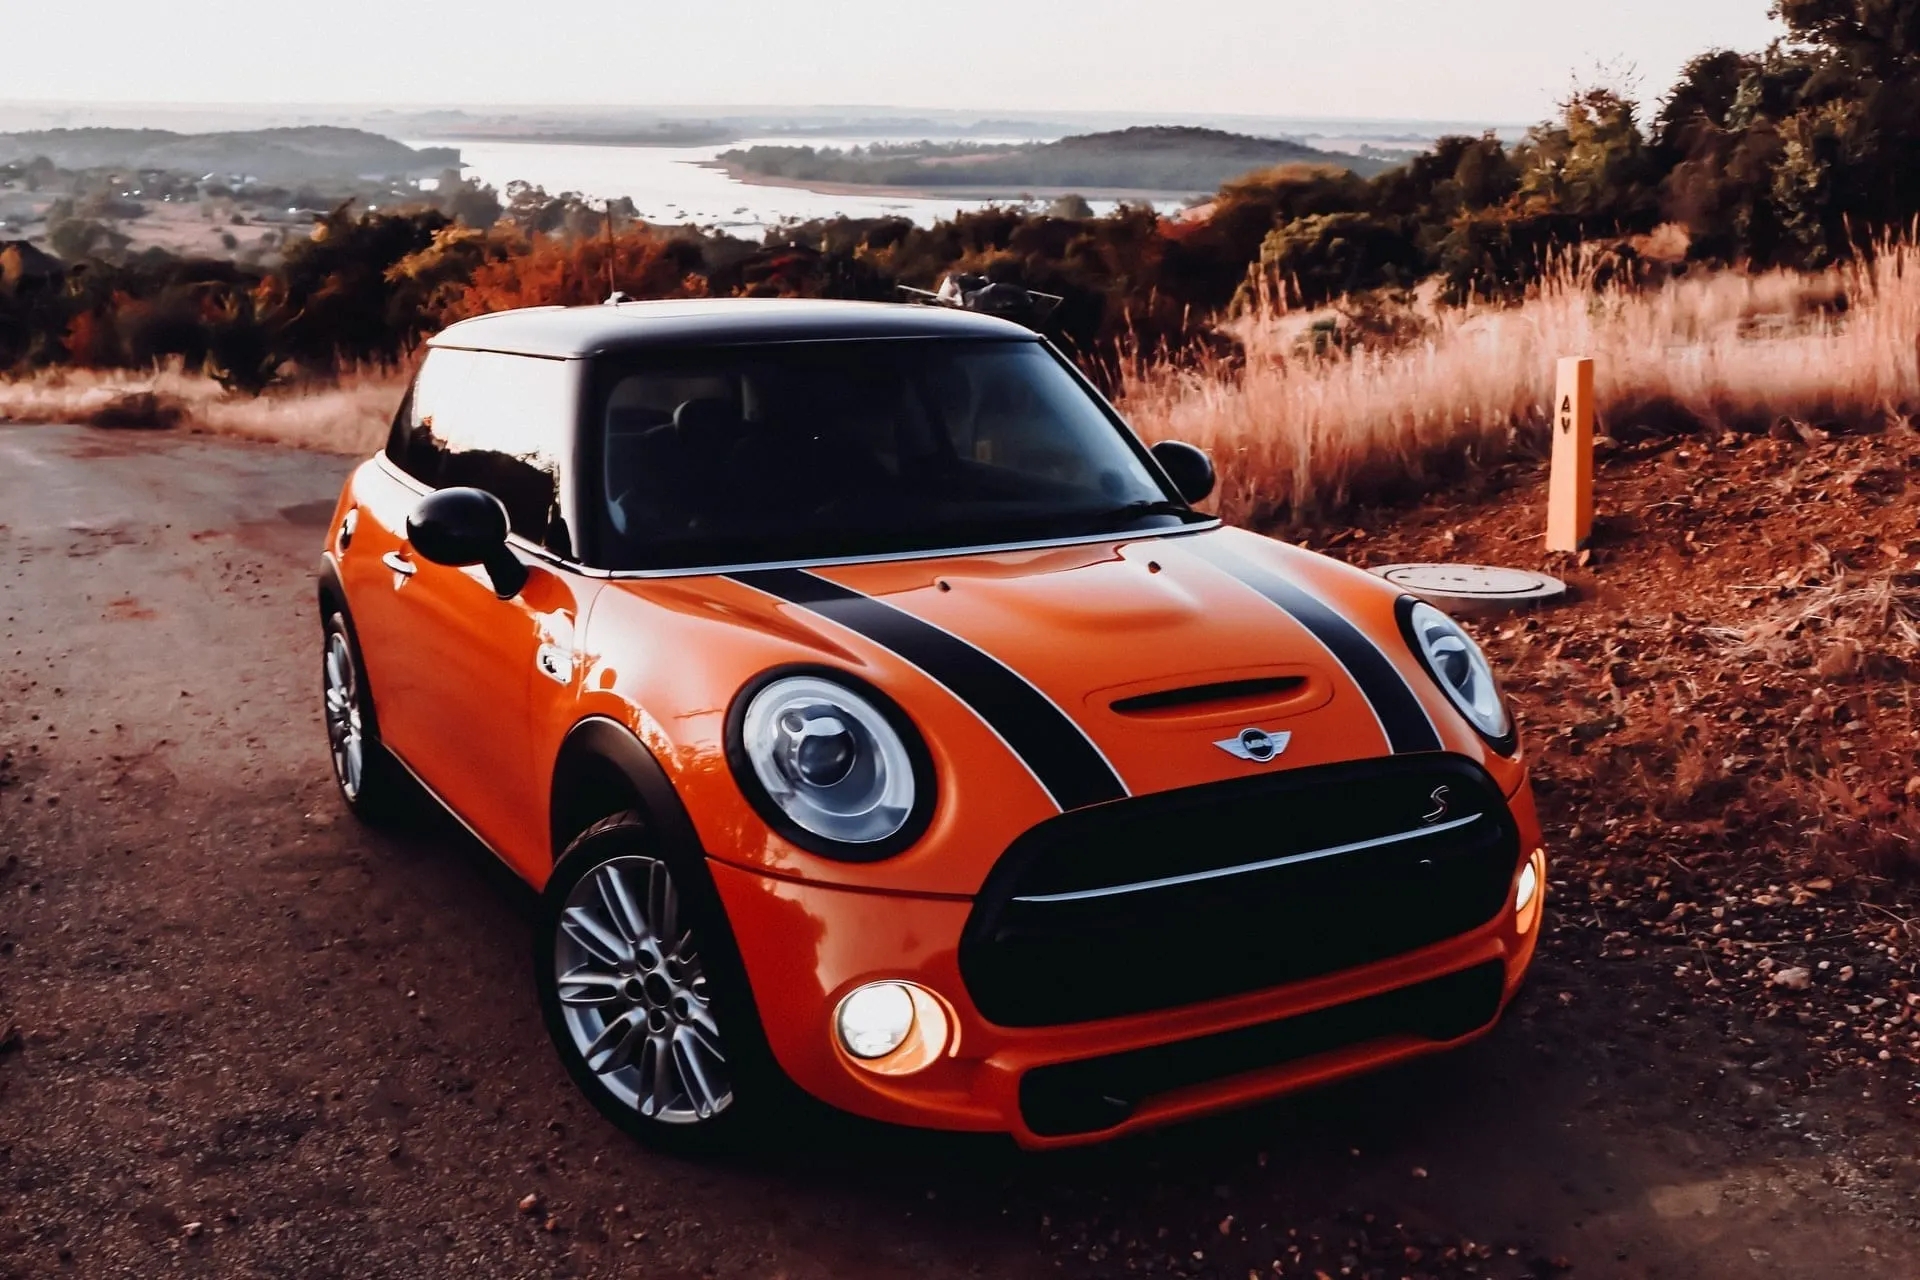 Mini Coopers are a fun option to tow behind your motorhome